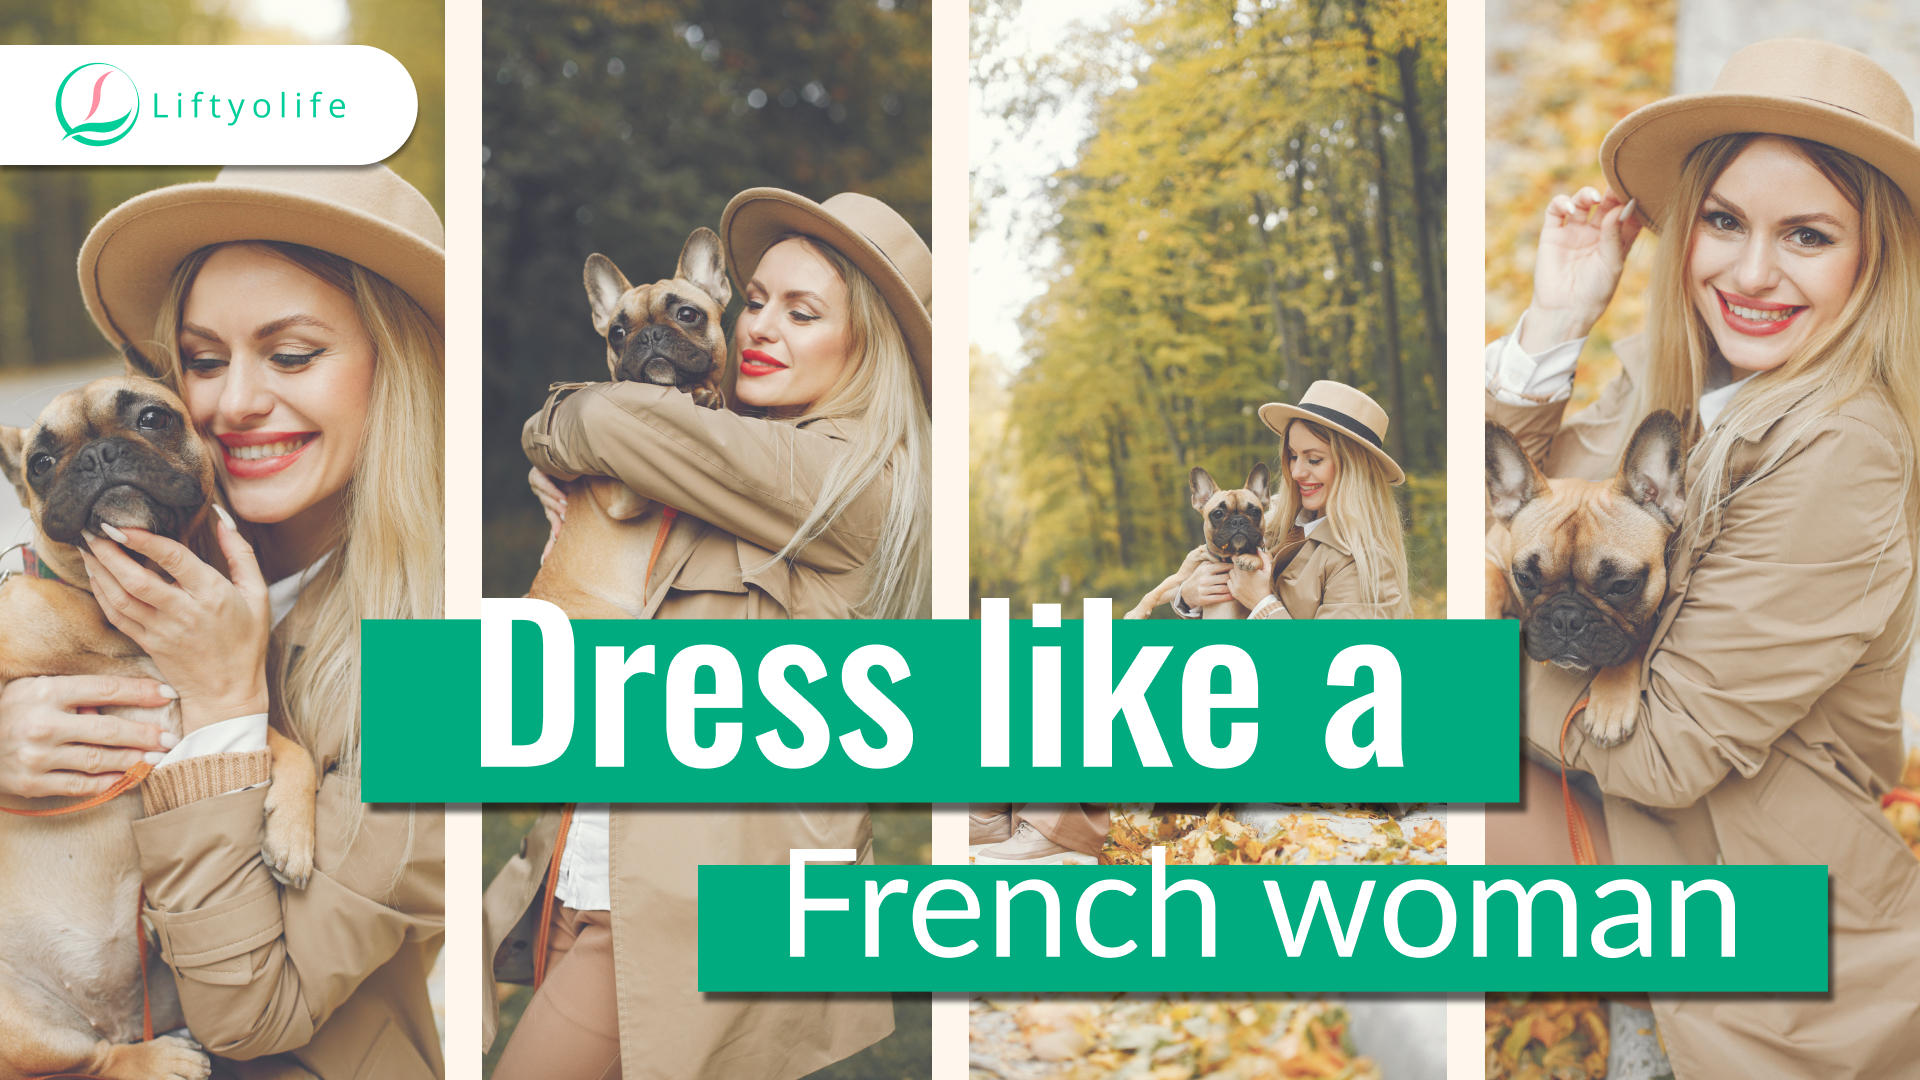 How To Dress Like A French Woman?